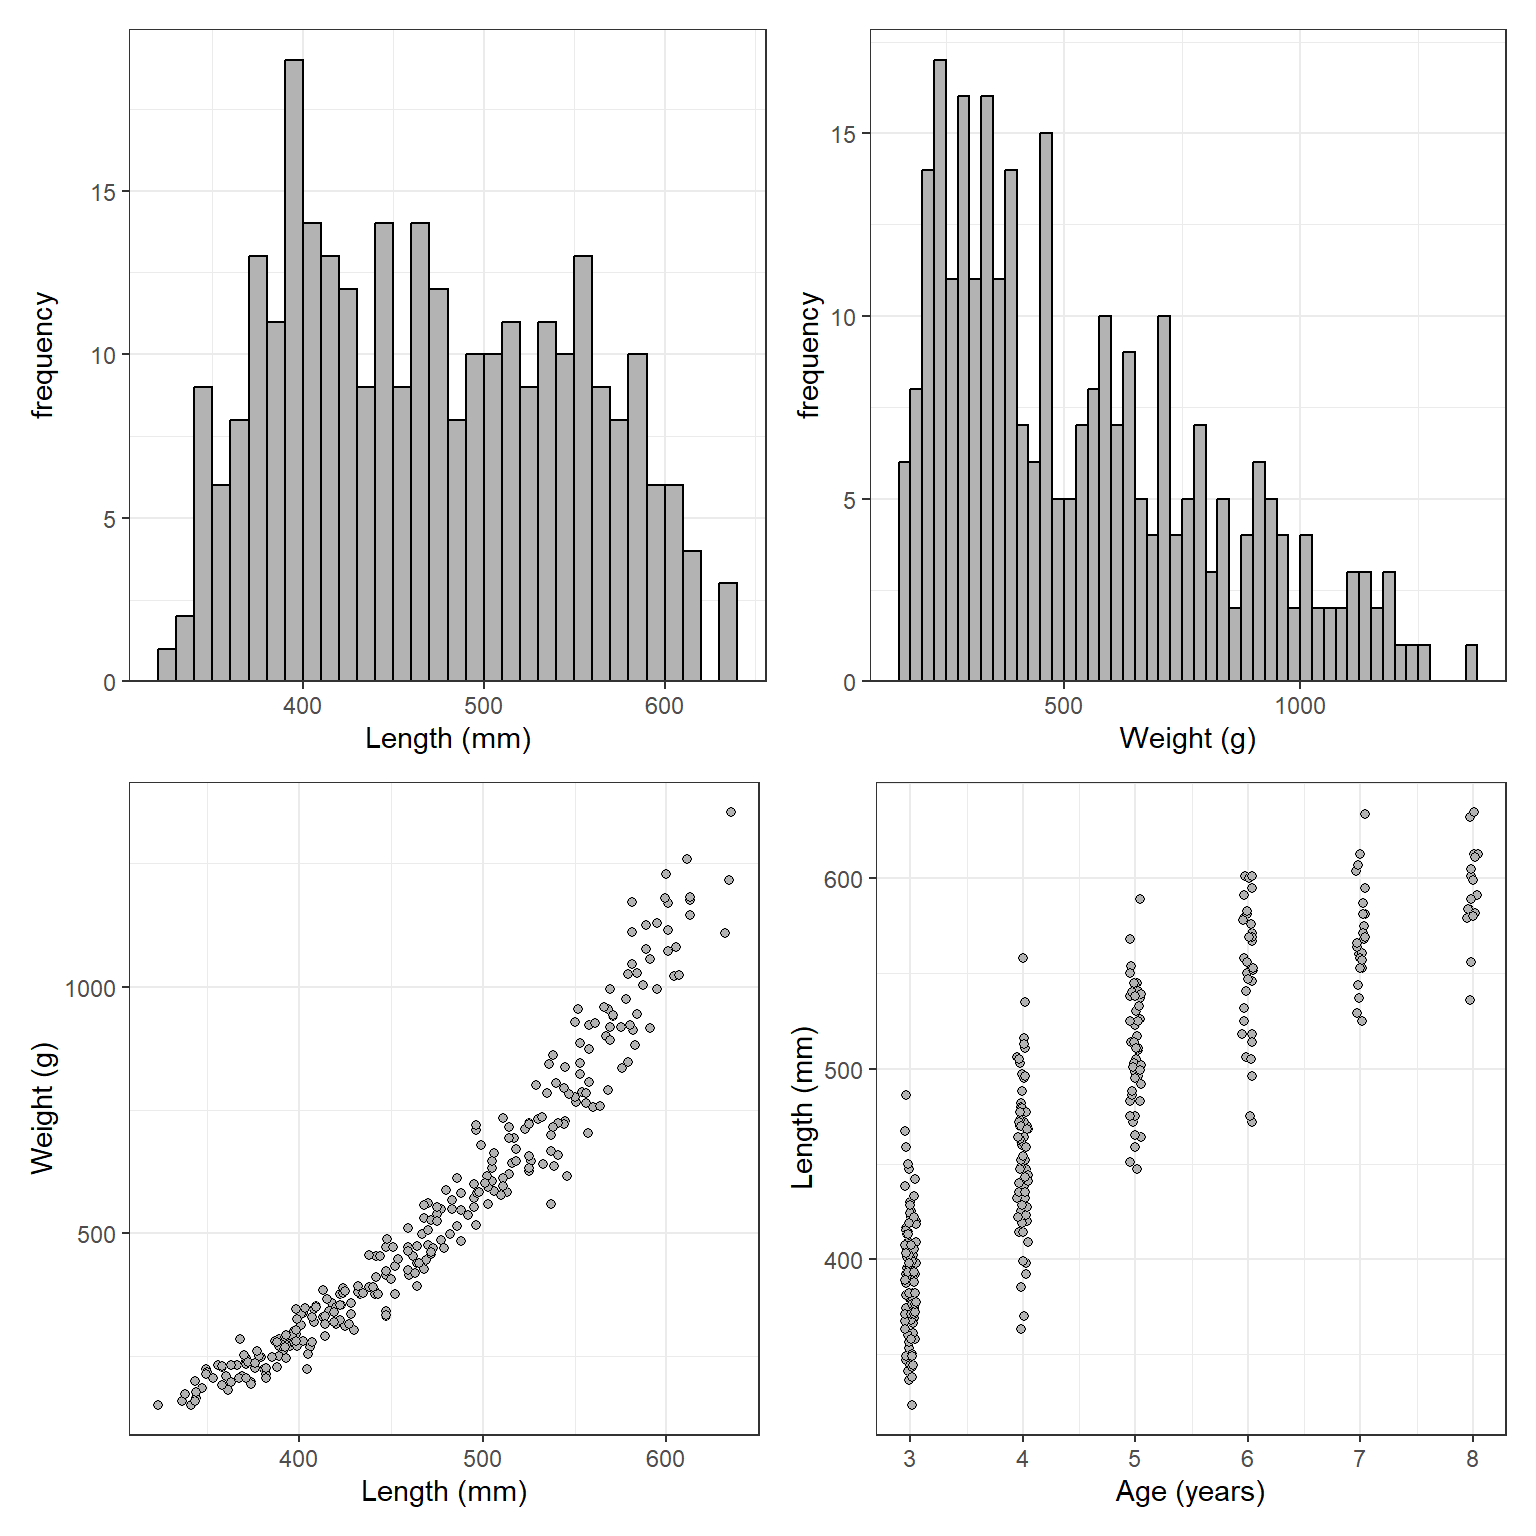 Histograms of lengths (upper left) and weights (upper right) and scatterplots of weight versus length (lower left) and length versus age (lower right).